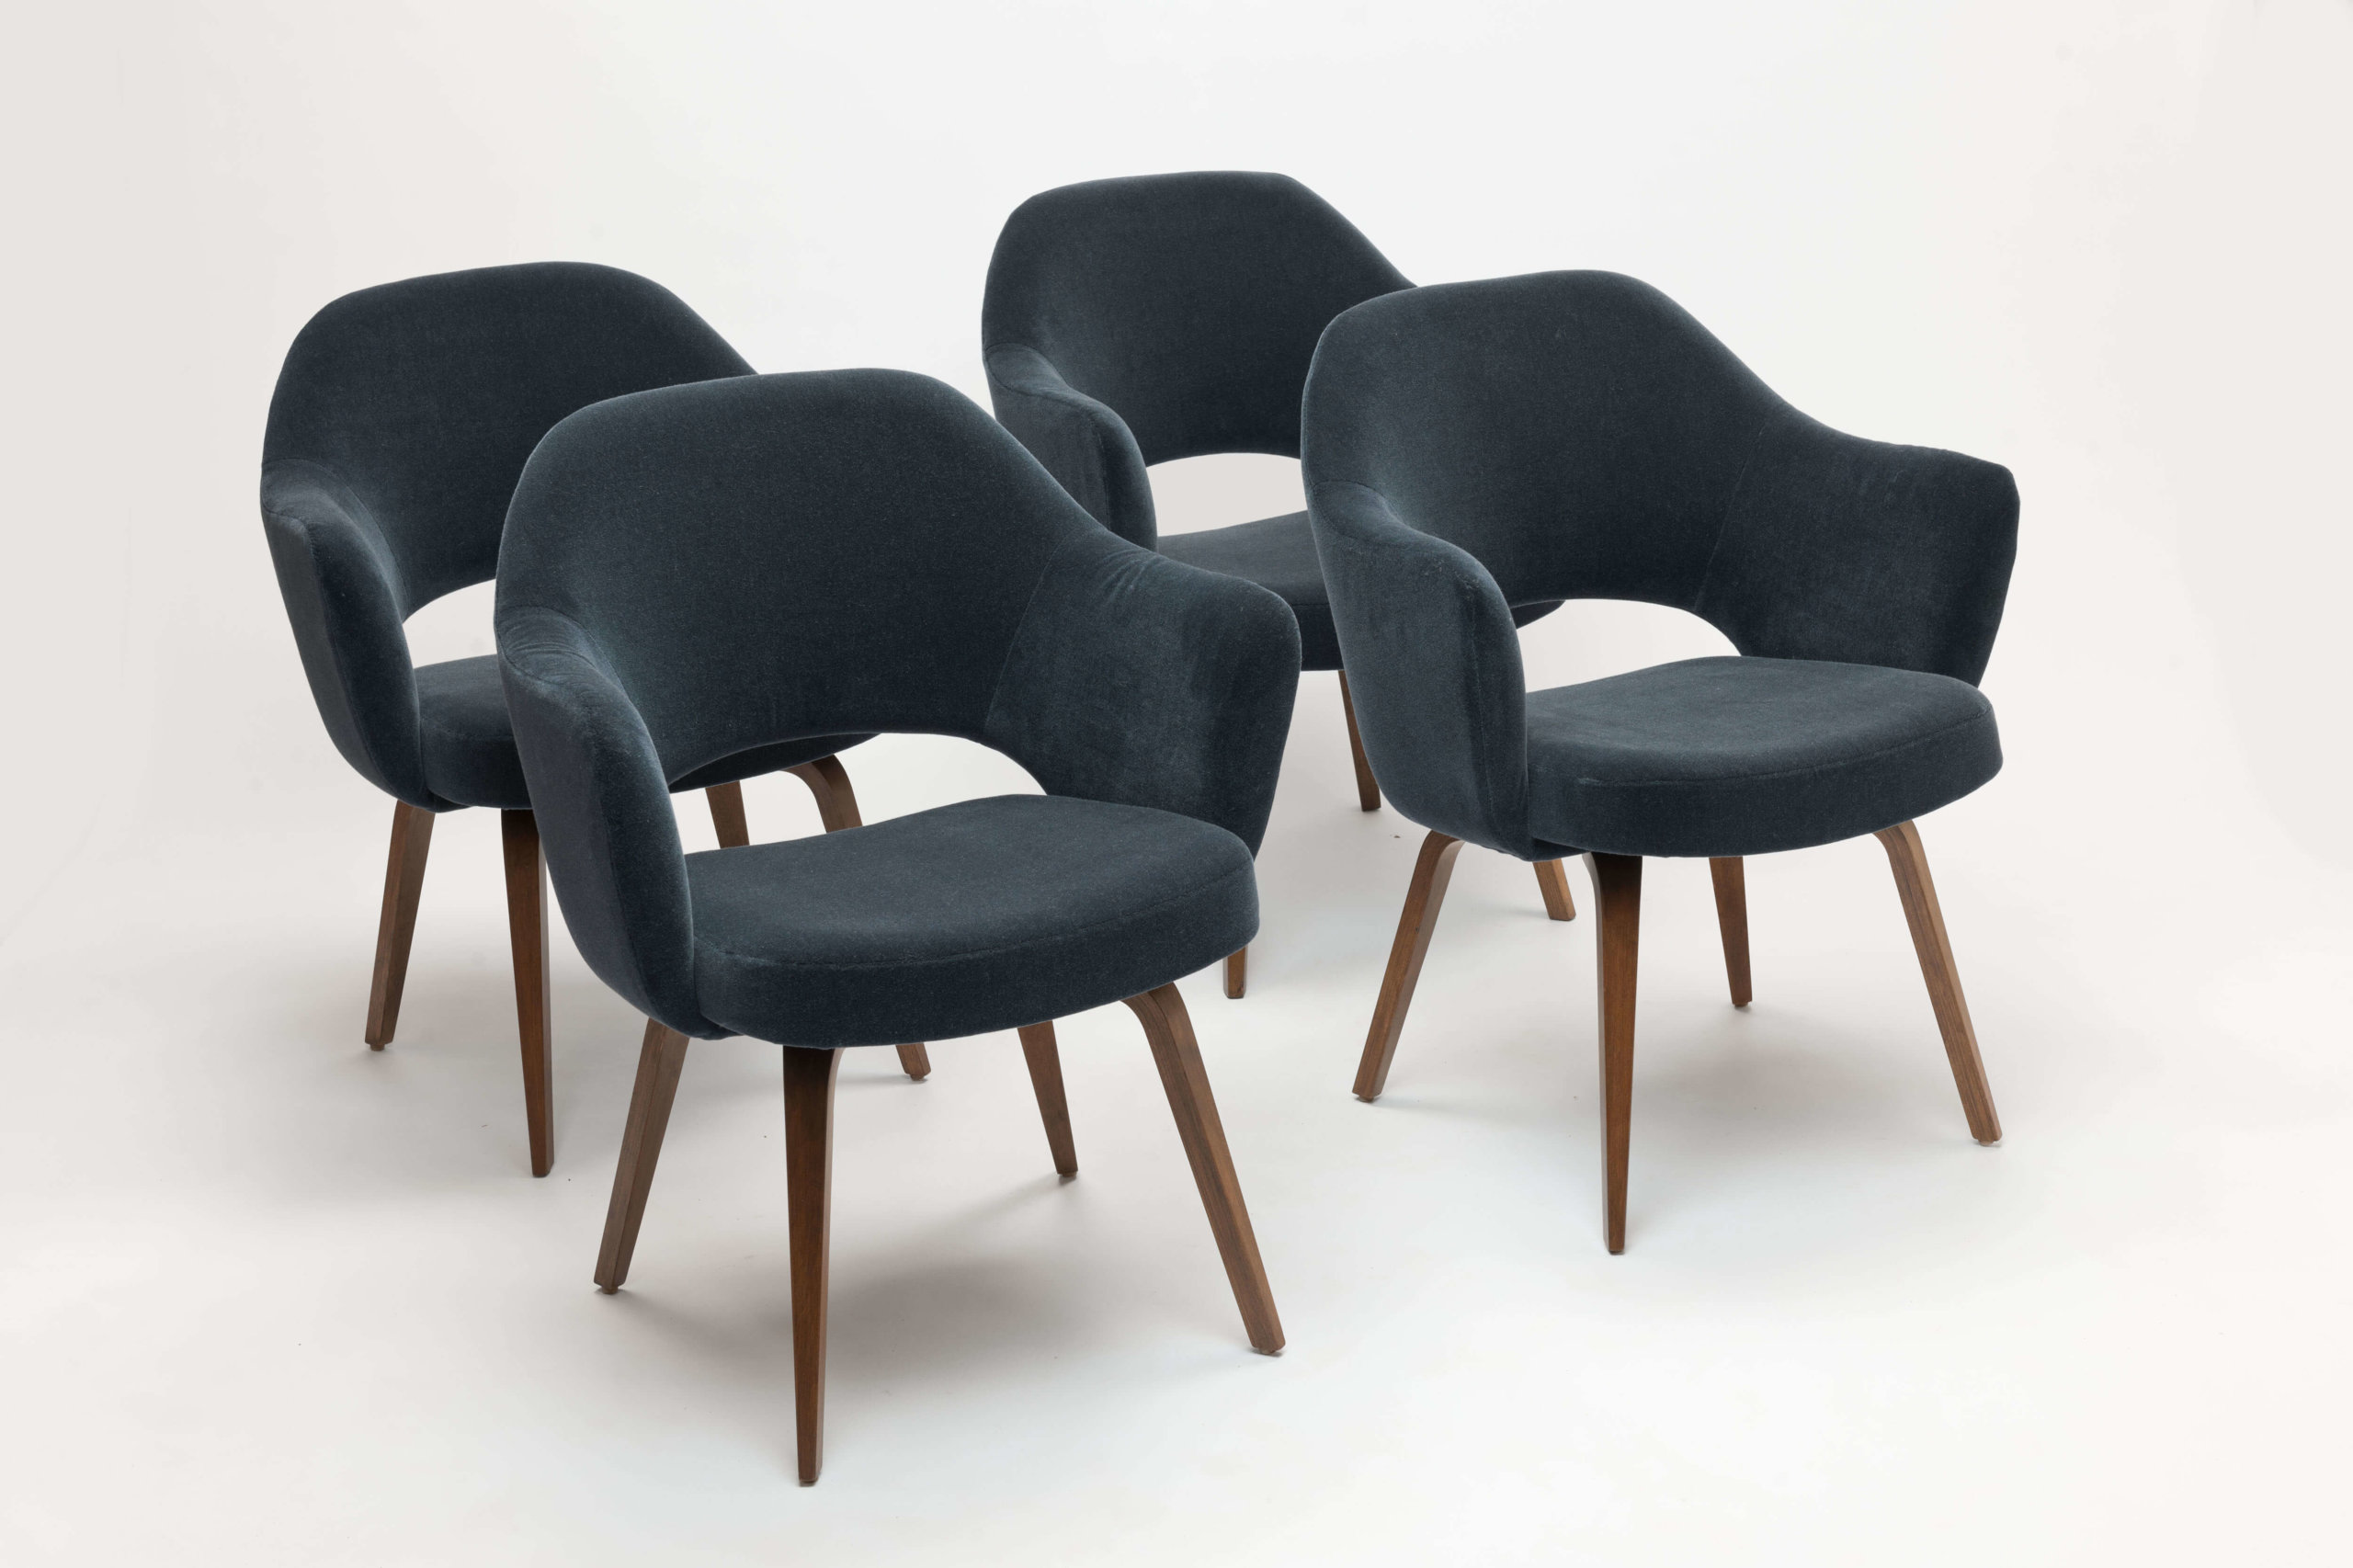 Model 71 chairs